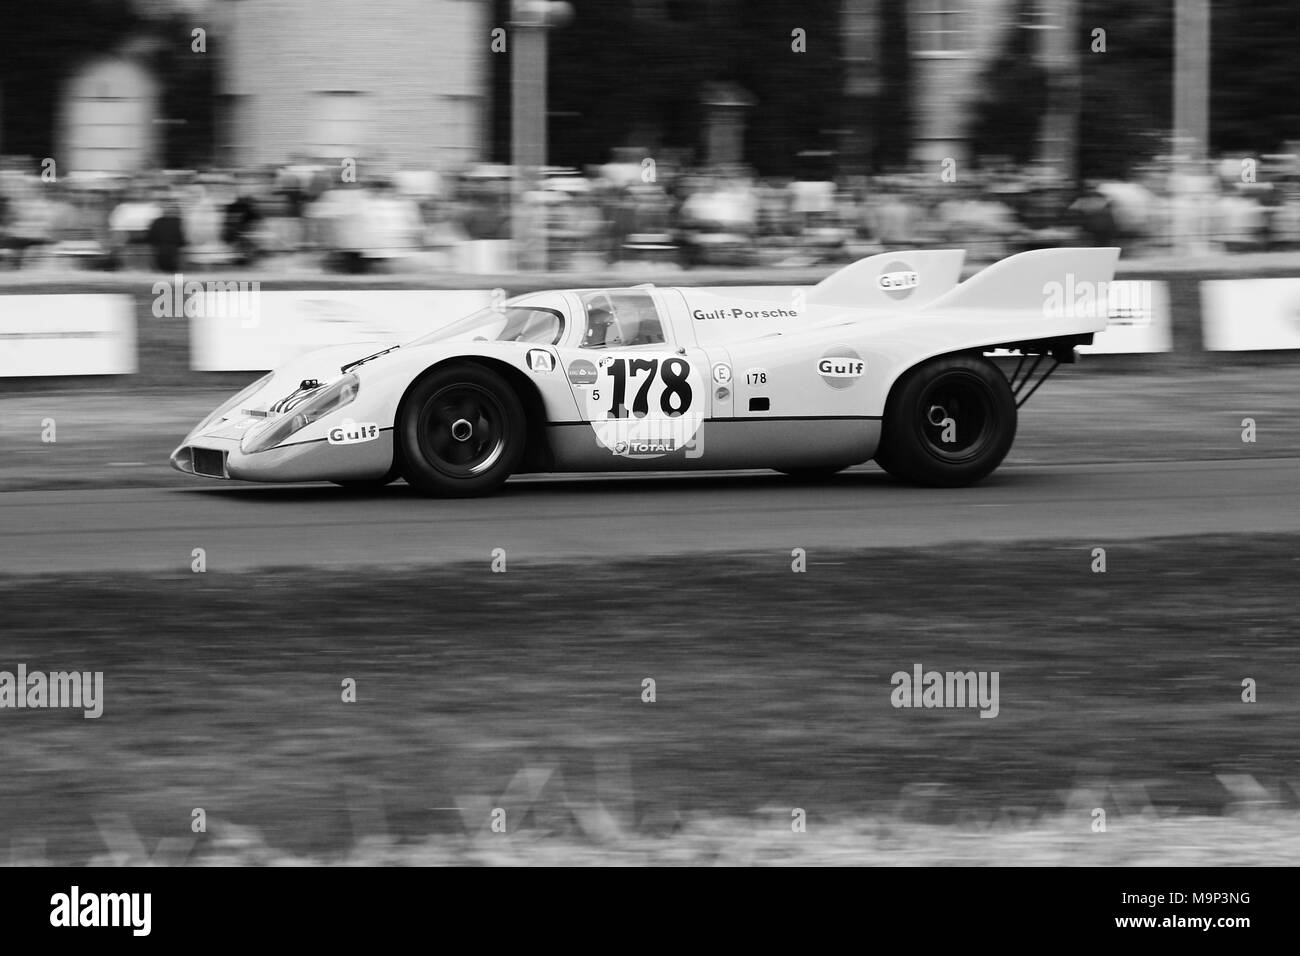 Gulf Porsche 917 K (917K). Chassis 917-026 racing at Goodwood. Porsche 917 gave Porsche their first wins at Le Mans 24 Hours in 1970 and 1971. Stock Photo